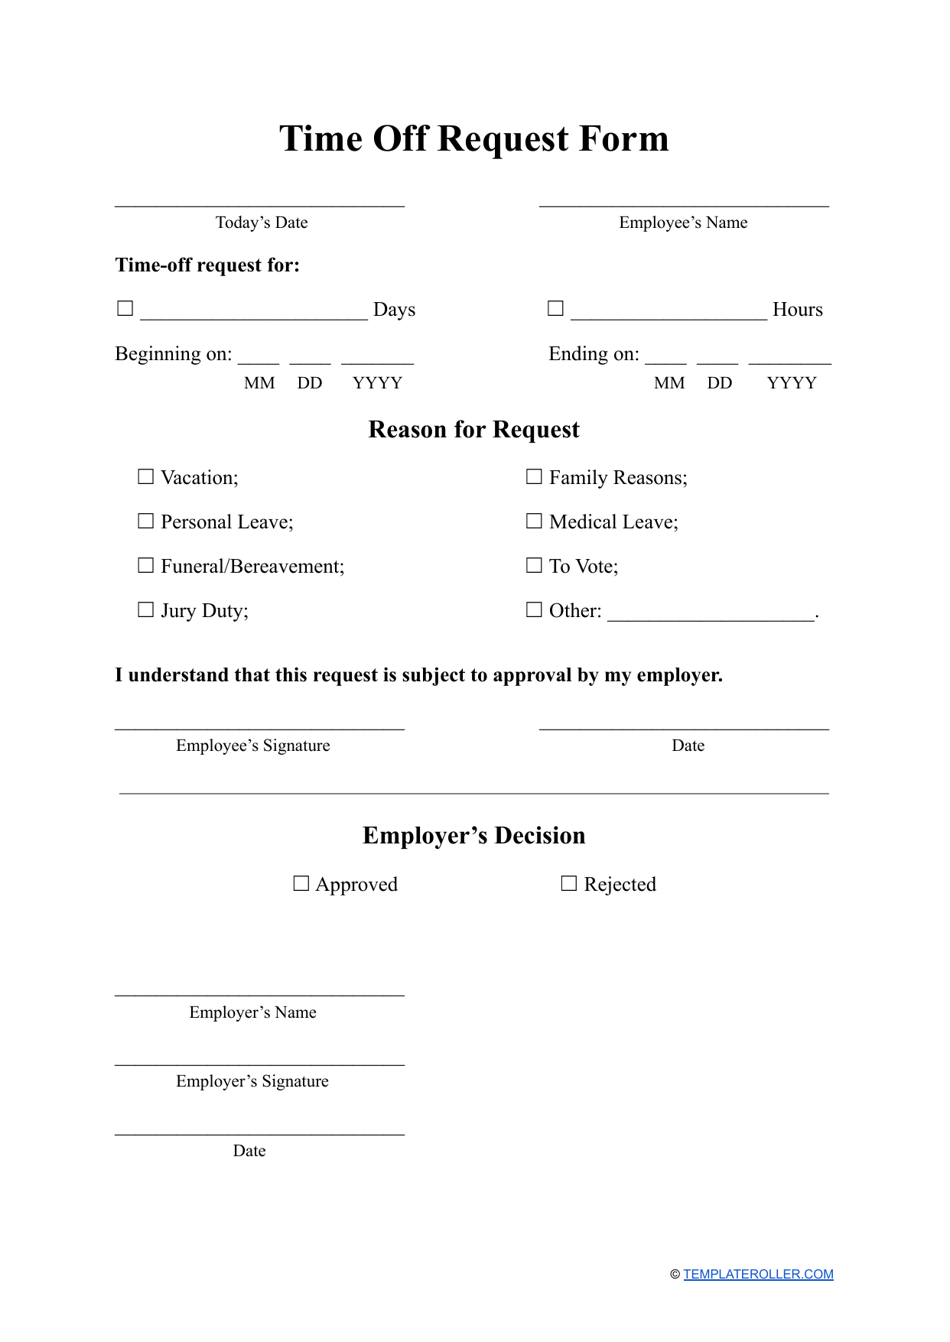 time-off-request-form-fill-out-sign-online-and-download-pdf-templateroller